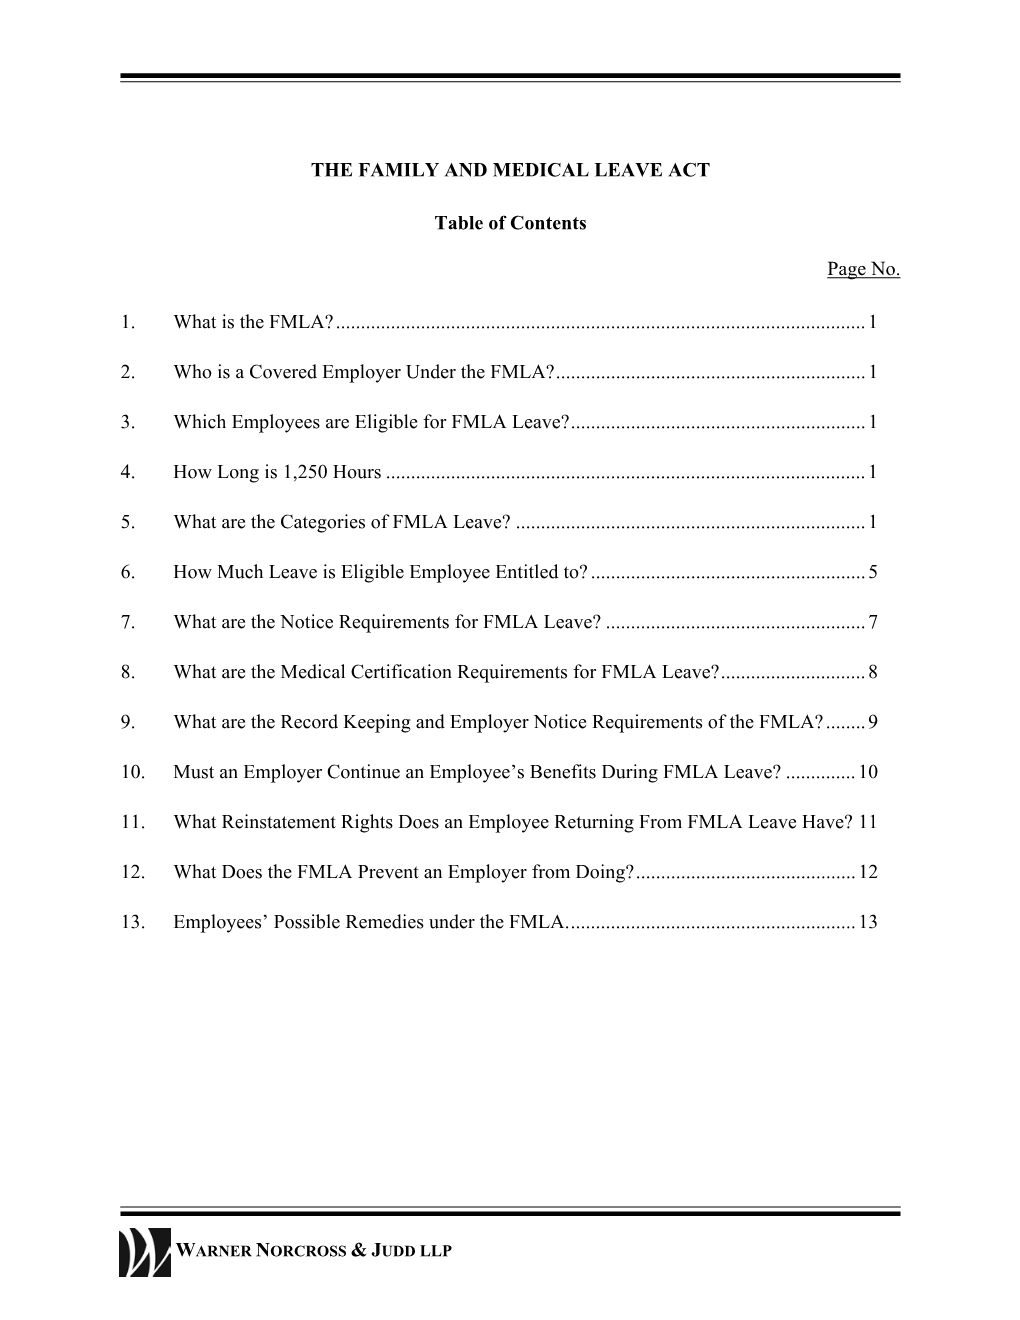 THE FAMILY and MEDICAL LEAVE ACT Table of Contents Page No. 1. What Is the FMLA?